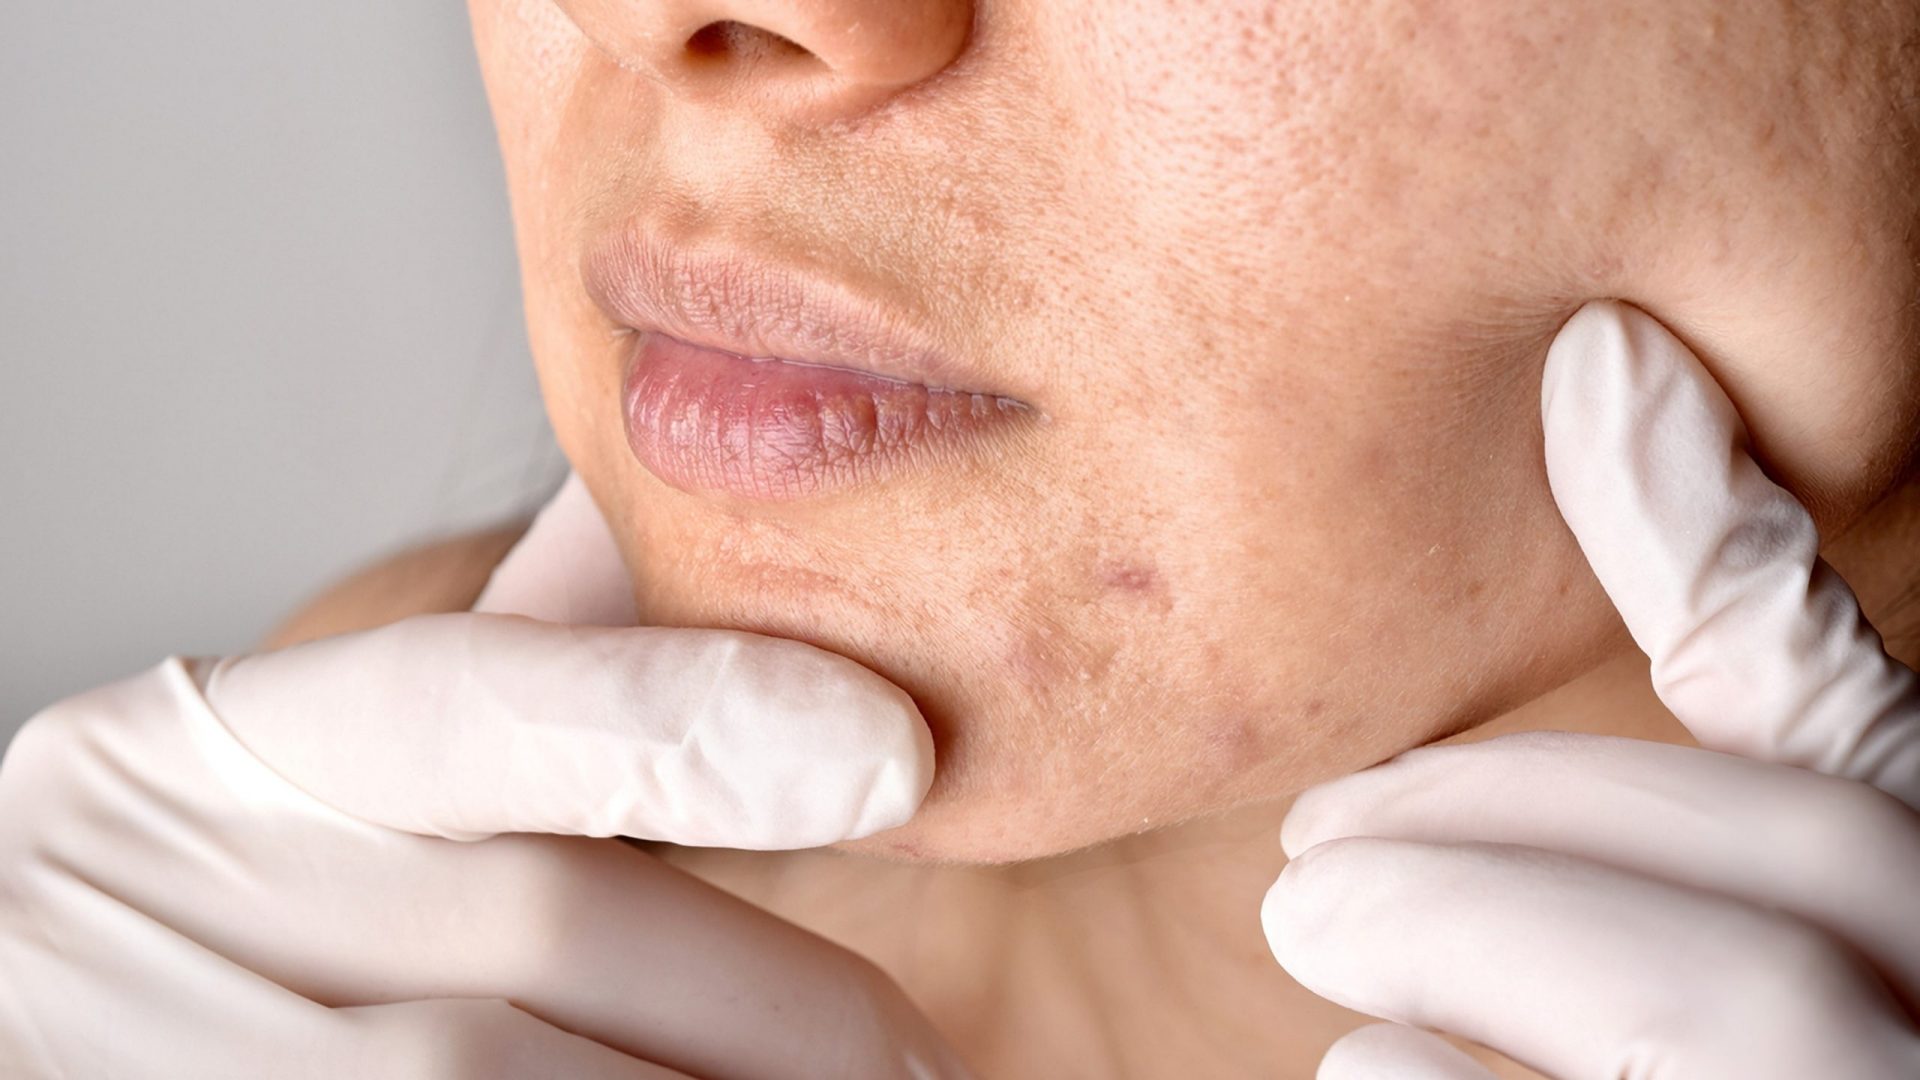 Pico Laser for Acne Scars: A Comprehensive Guide